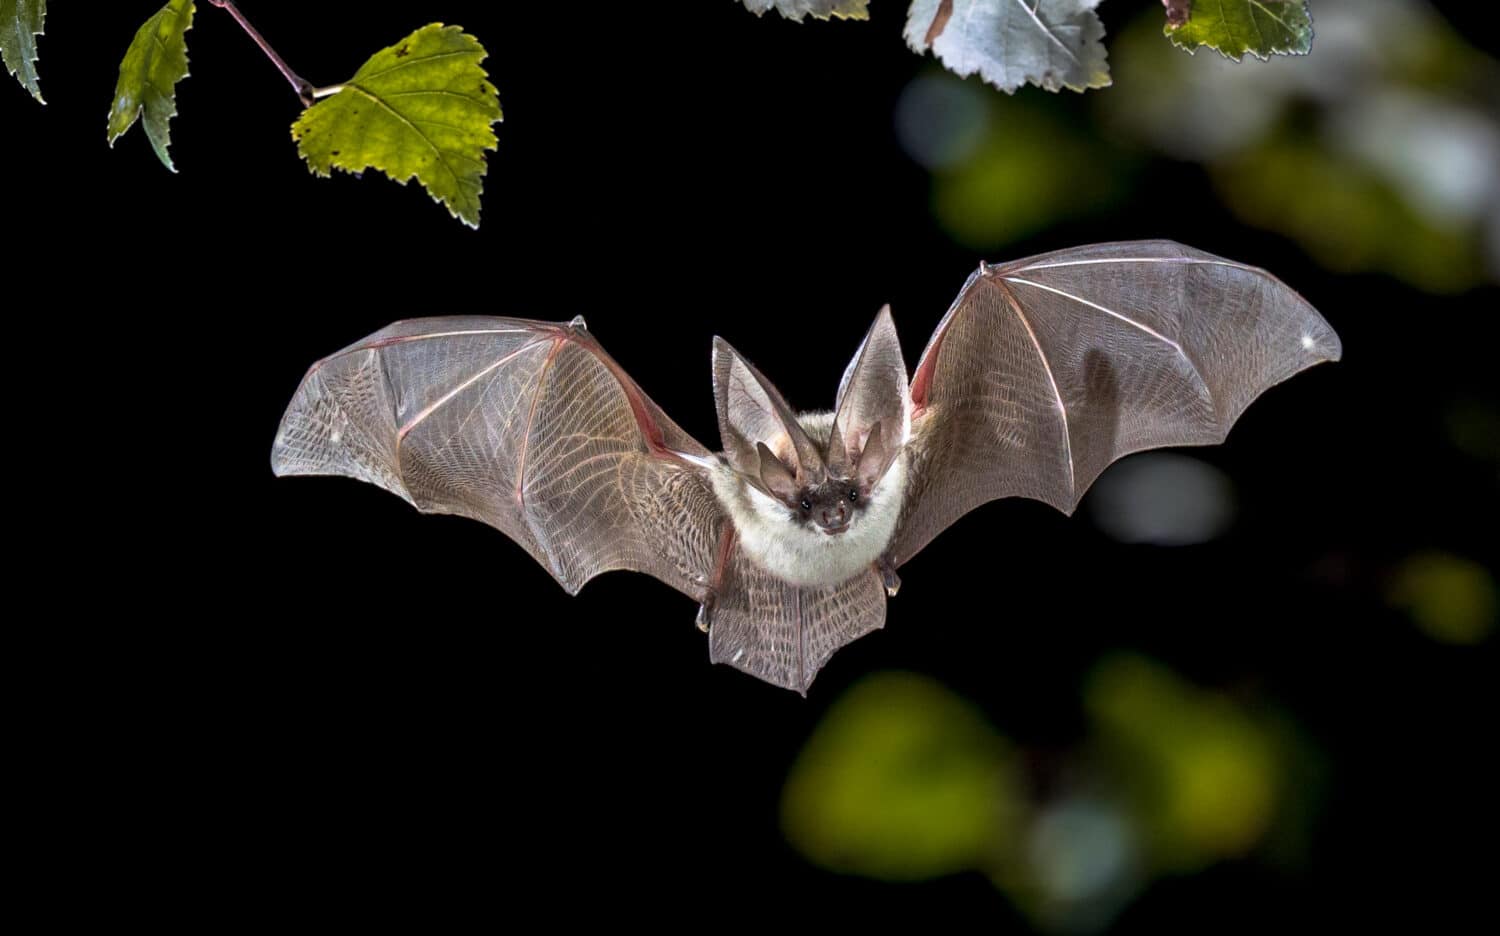 Flying bat hunting in forest. The grey long-eared bat (Plecotus austriacus) is a fairly large European bat. It has distinctive ears, long and with a distinctive fold. It hunts above woodland.